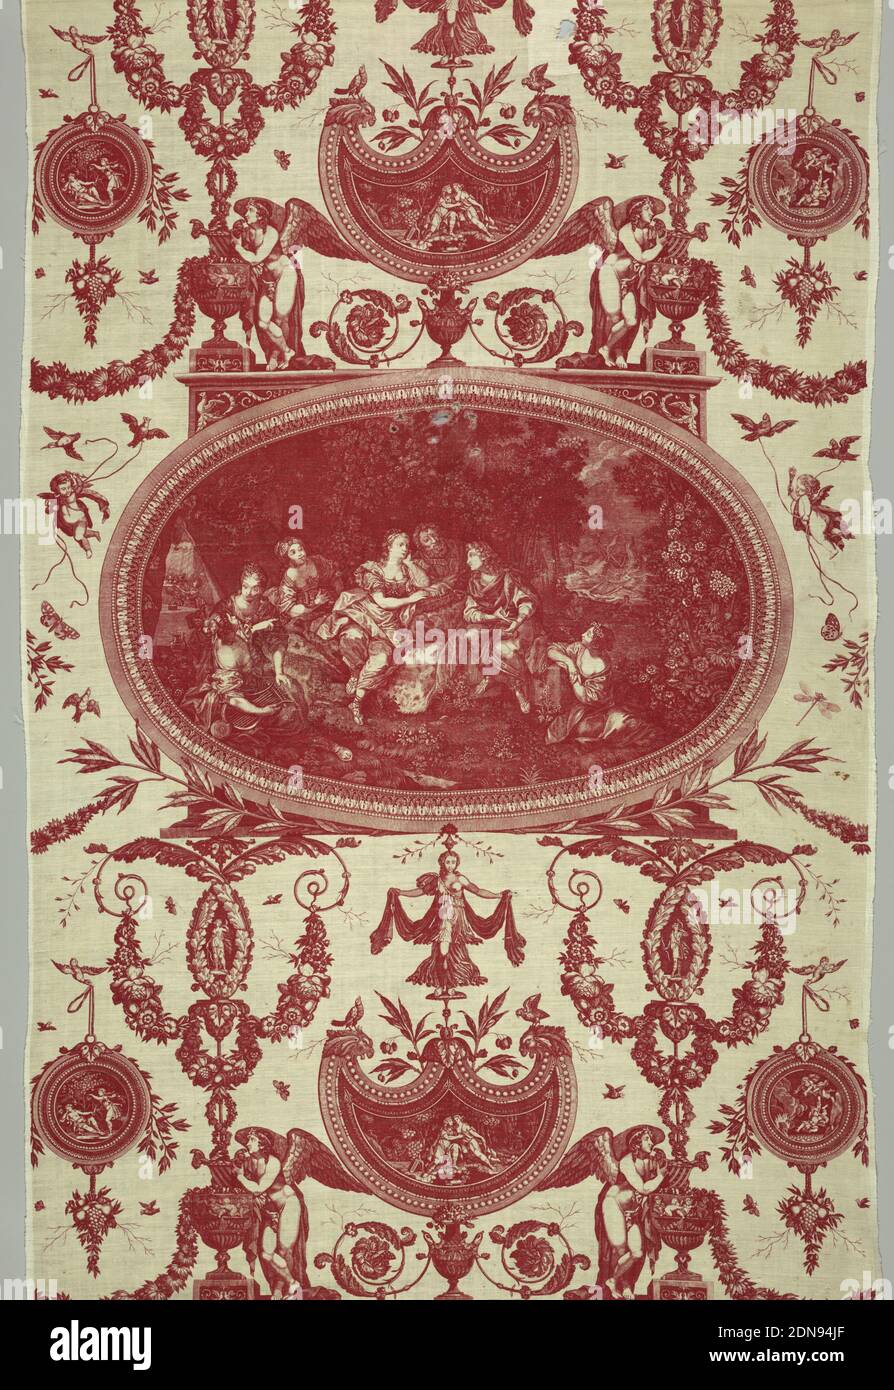 Textile, Medium: cotton Technique: printed by engraved copper plate on plain weave; mordant for red, Large oval frame enclosing the scene titled 'Telemachus in Calypsos grotto' from an engraving by J.F. Beauvarlet of 1773 after a painting by Jean Raoux of 1722., The frame is supported by an elaborate bracket with urns (an angel leaning on the urn) garlands, hanging medallions, a shield with a small scene from the Telemachus story. Length of repeat: 101cm. (39 3/4'). Lengths of repeat: 101cm. (39 3/4'). Lengths of fabric placed side-by-side would continue pattern as in a straight repeat Stock Photo